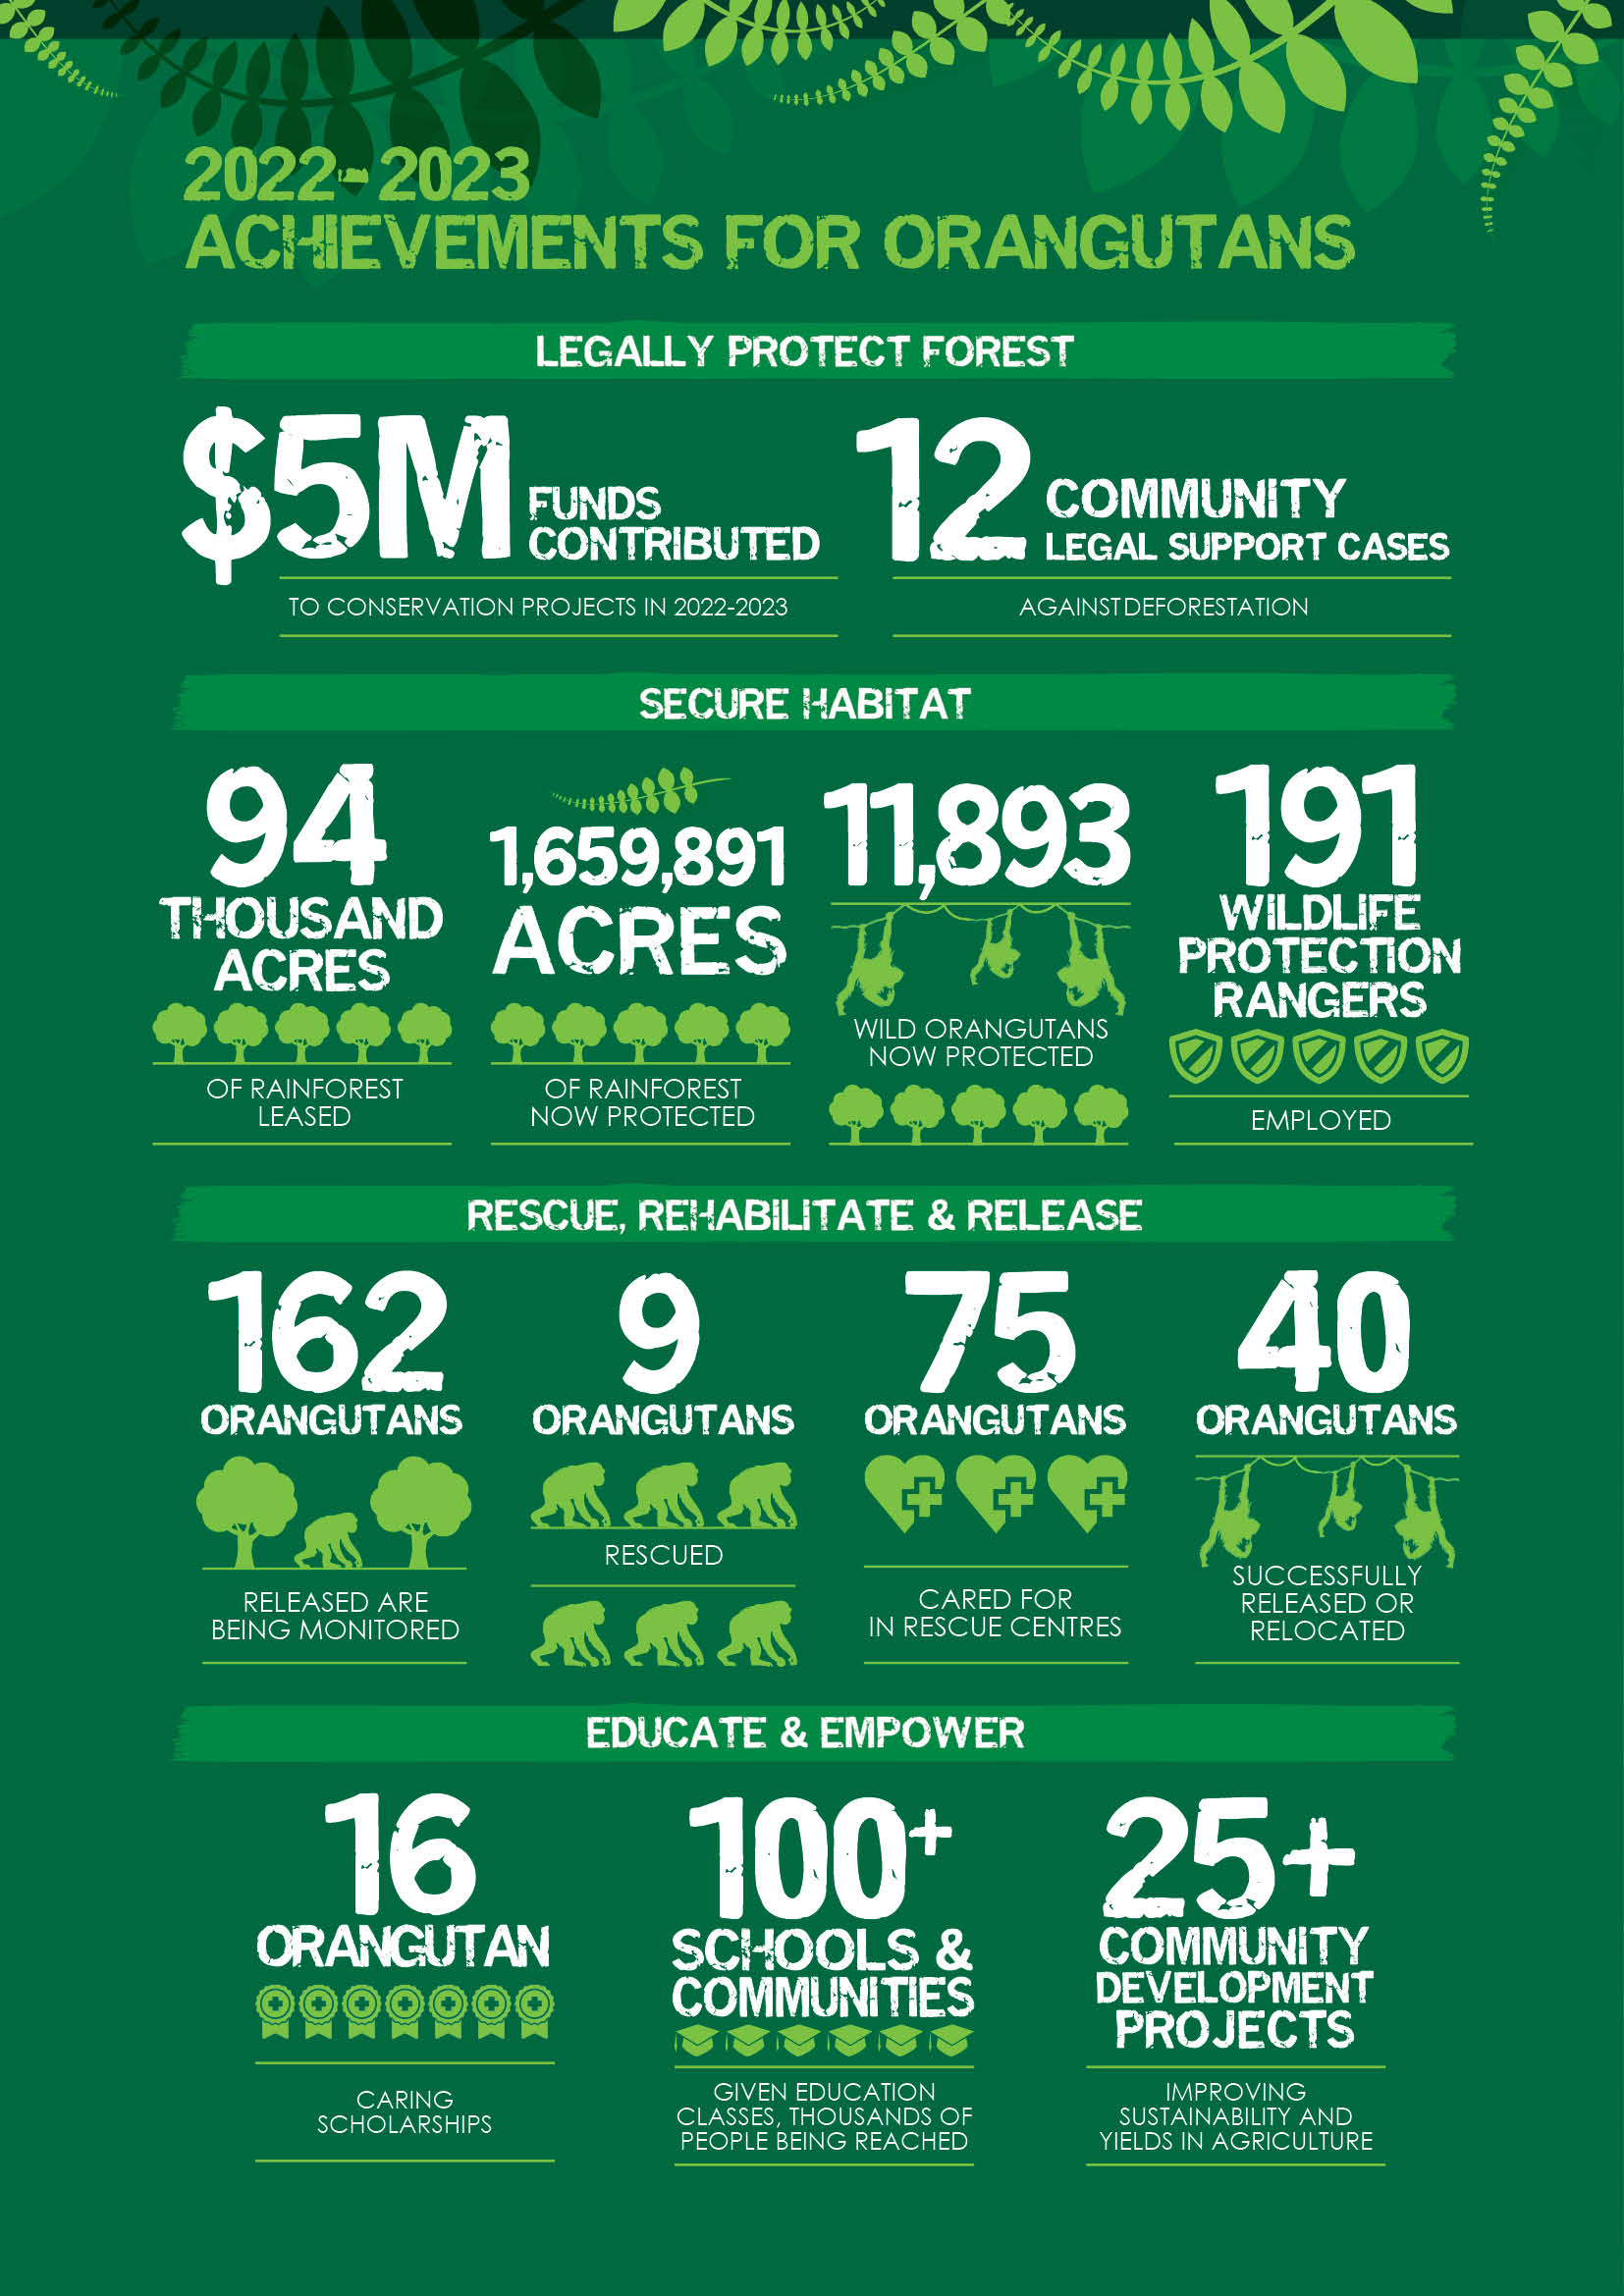 Our Impact by the Numbers